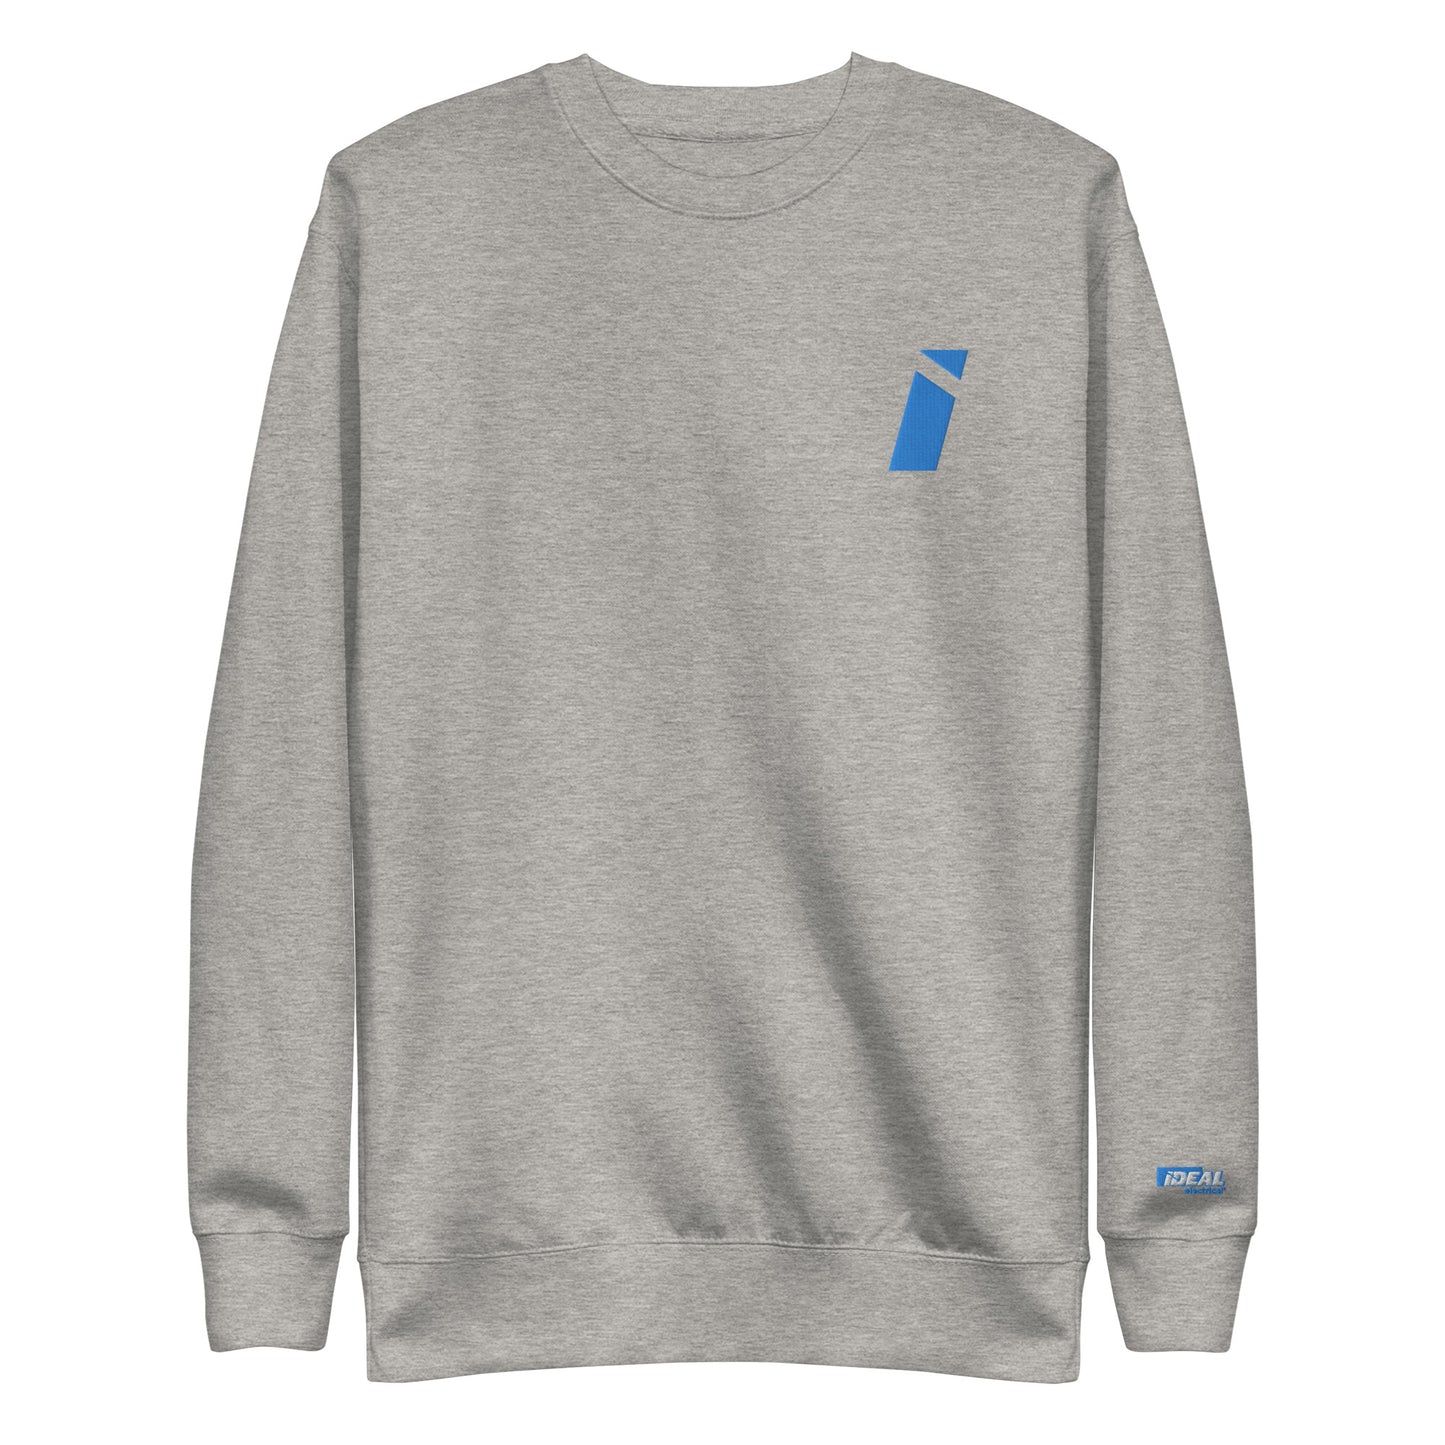 IDEAL Electrical Embroidered Premium Crewneck with Blue Brand Mark (Unisex)